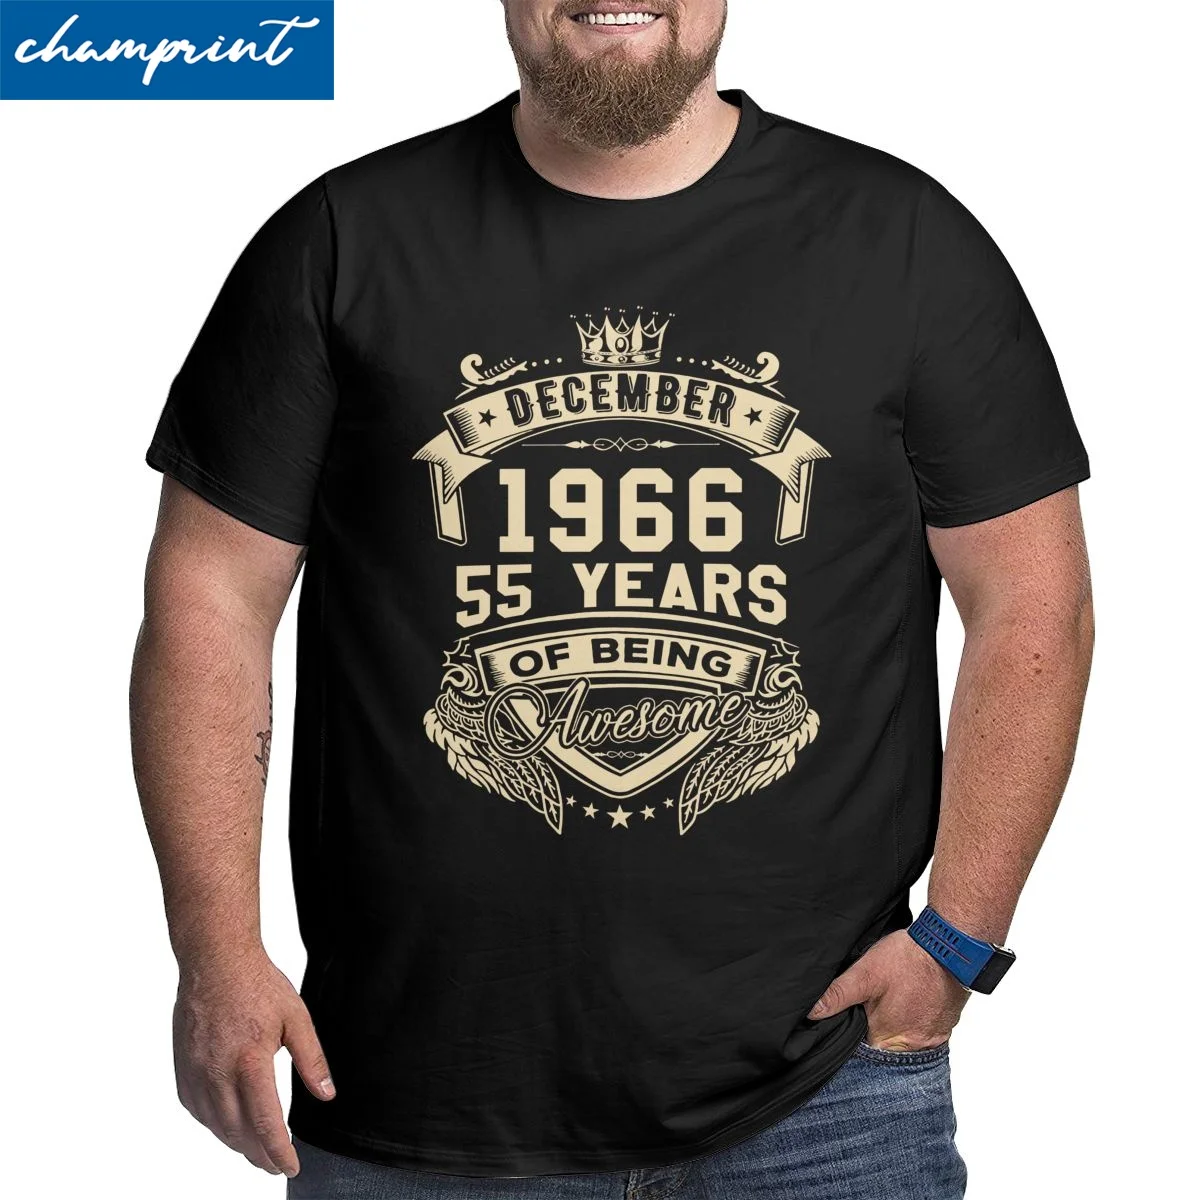 

Born In December 1966 55 Years Of Being Awesome T-Shirts Men 55th Birthday Gift Big Tall Tee Shirt T Shirt Oversized 4XL 5XL 6XL